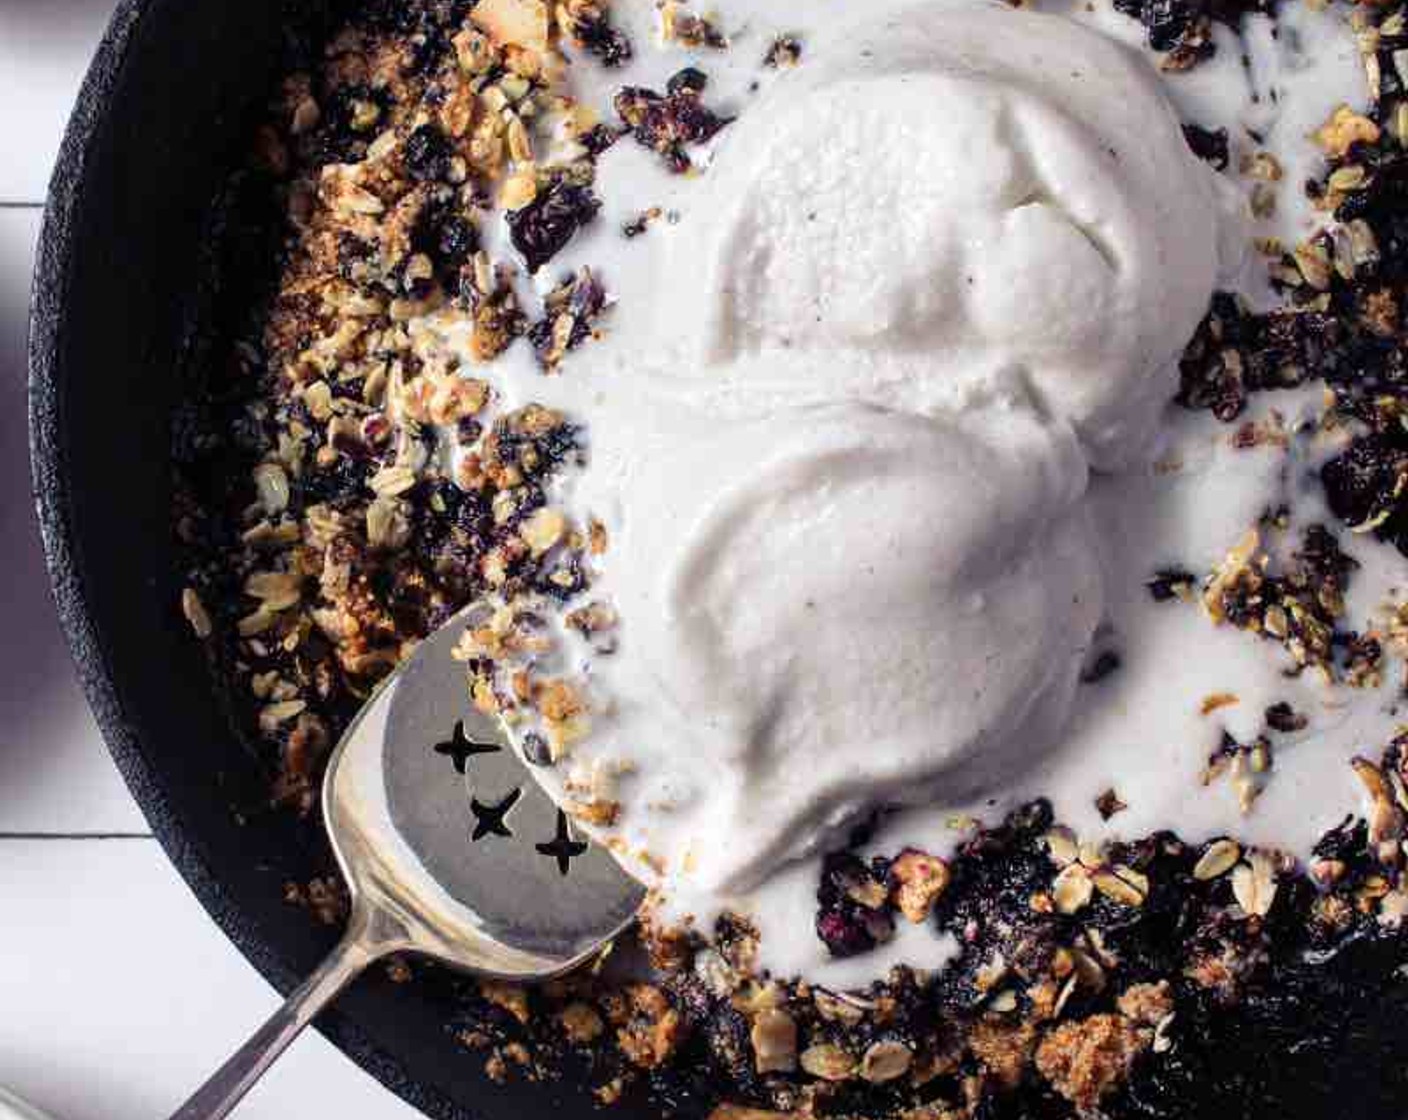 step 7 Bake for 30 minutes or until crumble topping is golden brown. Serve immediately with vanilla ice cream.